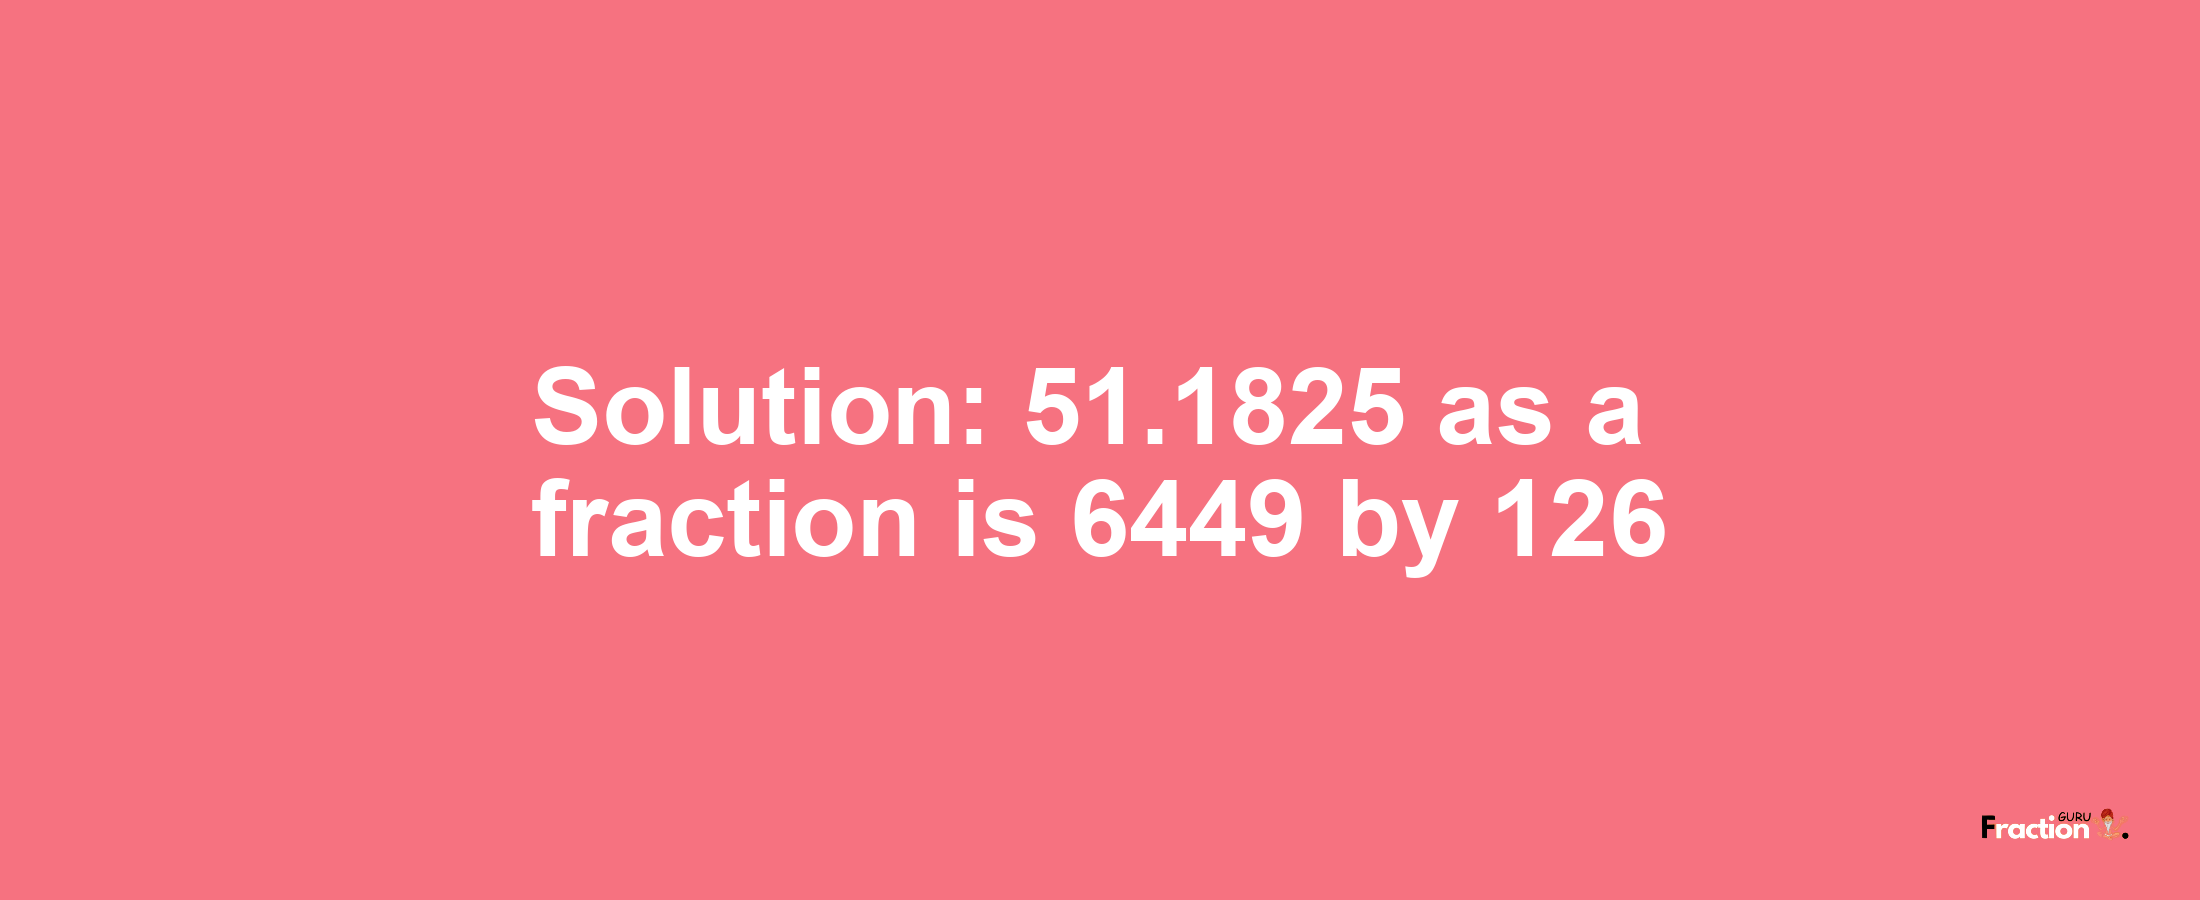 Solution:51.1825 as a fraction is 6449/126